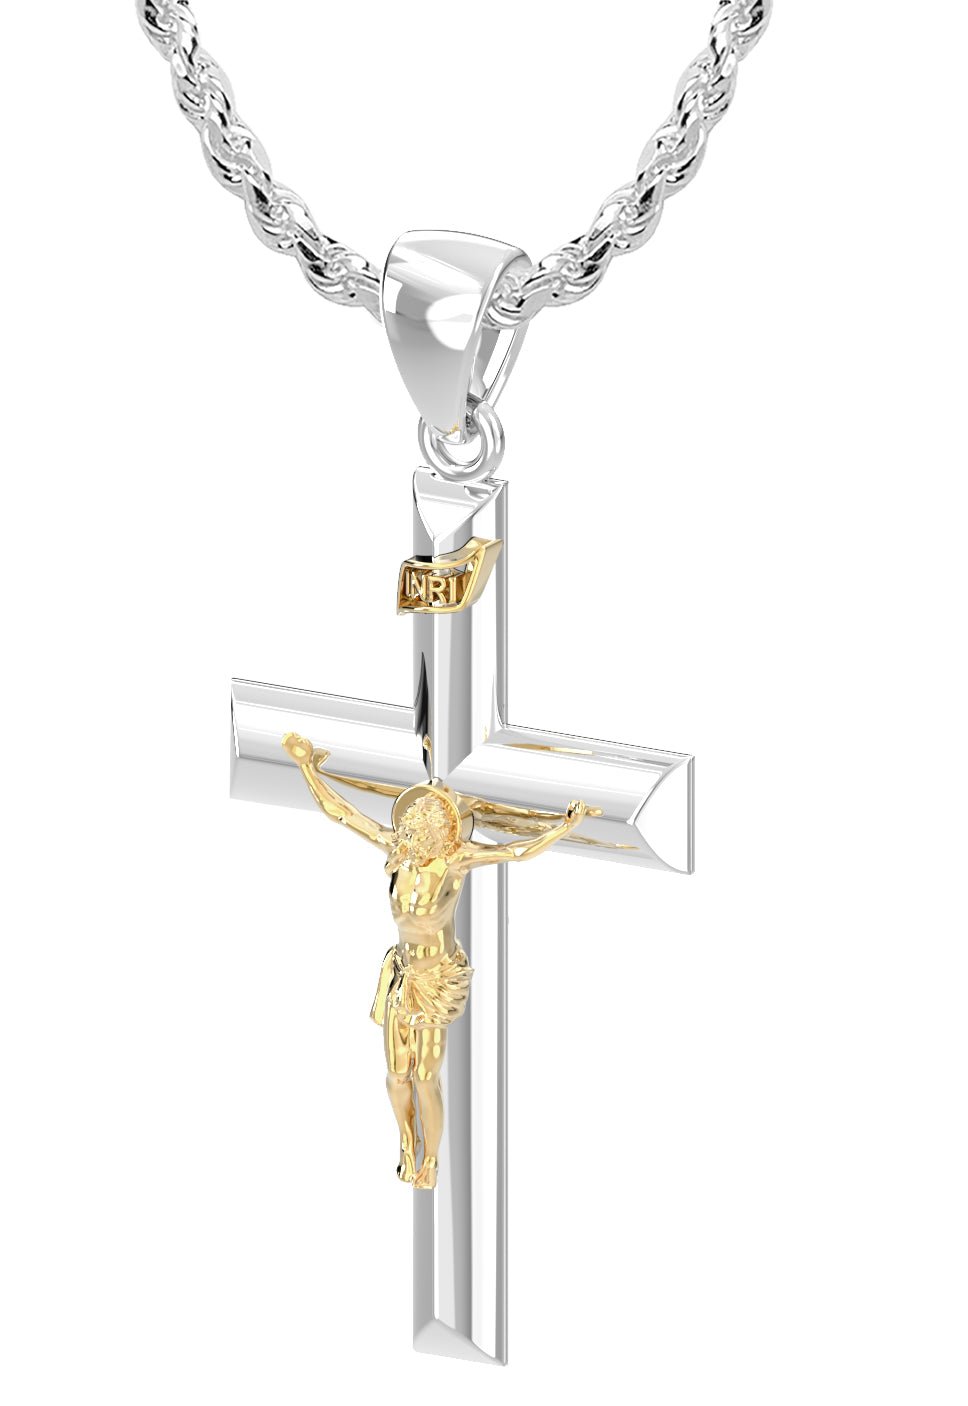 Ladies 925 Sterling Silver High Polished Crucifix Cross Pendant Necklace,  32mm - 18in, 2.4mm Rope Chain